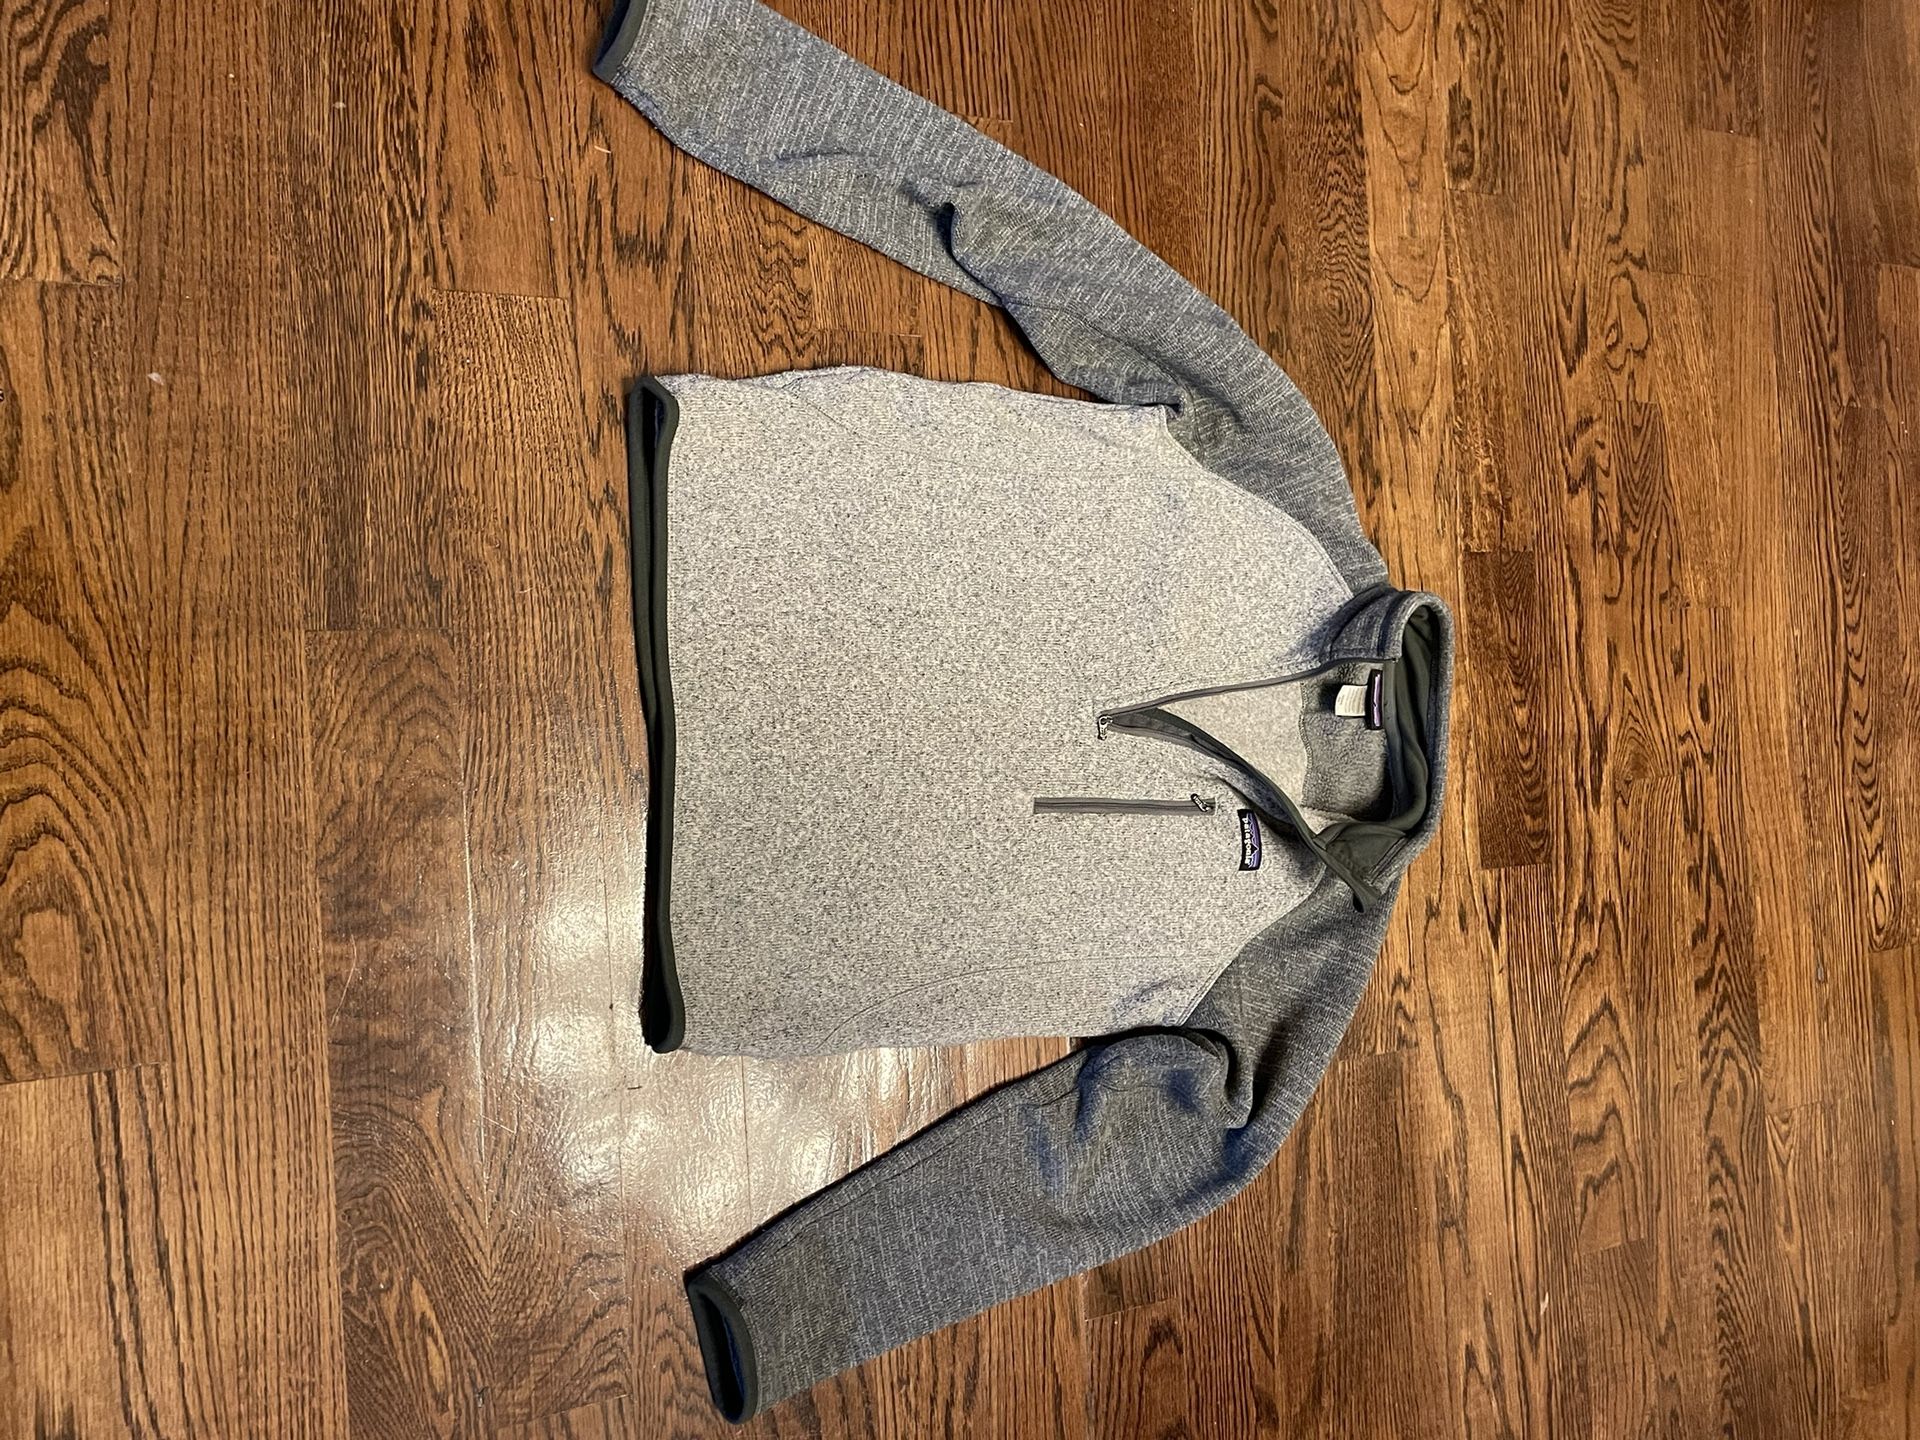 Men’s XS Patagonia Sweater $20 - Great Condition 